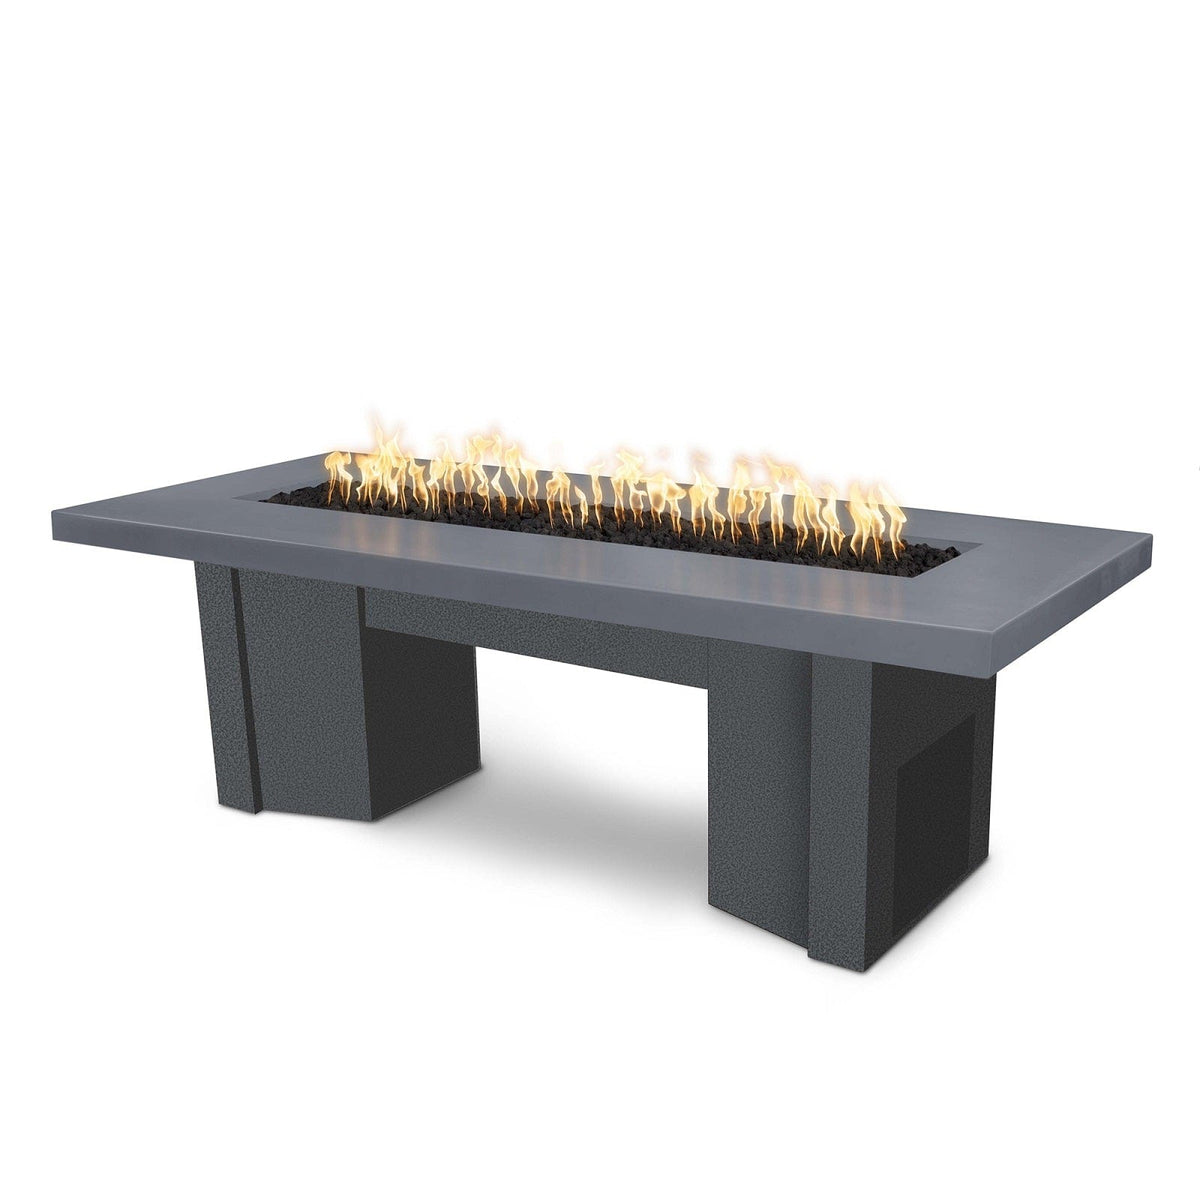 The Outdoor Plus Fire Features Gray (-GRY) / Silver Vein Powder Coated Steel (-SLV) The Outdoor Plus 78&quot; Alameda Fire Table Smooth Concrete in Natural Gas - Match Lit / OPT-ALMGFRC78-NG